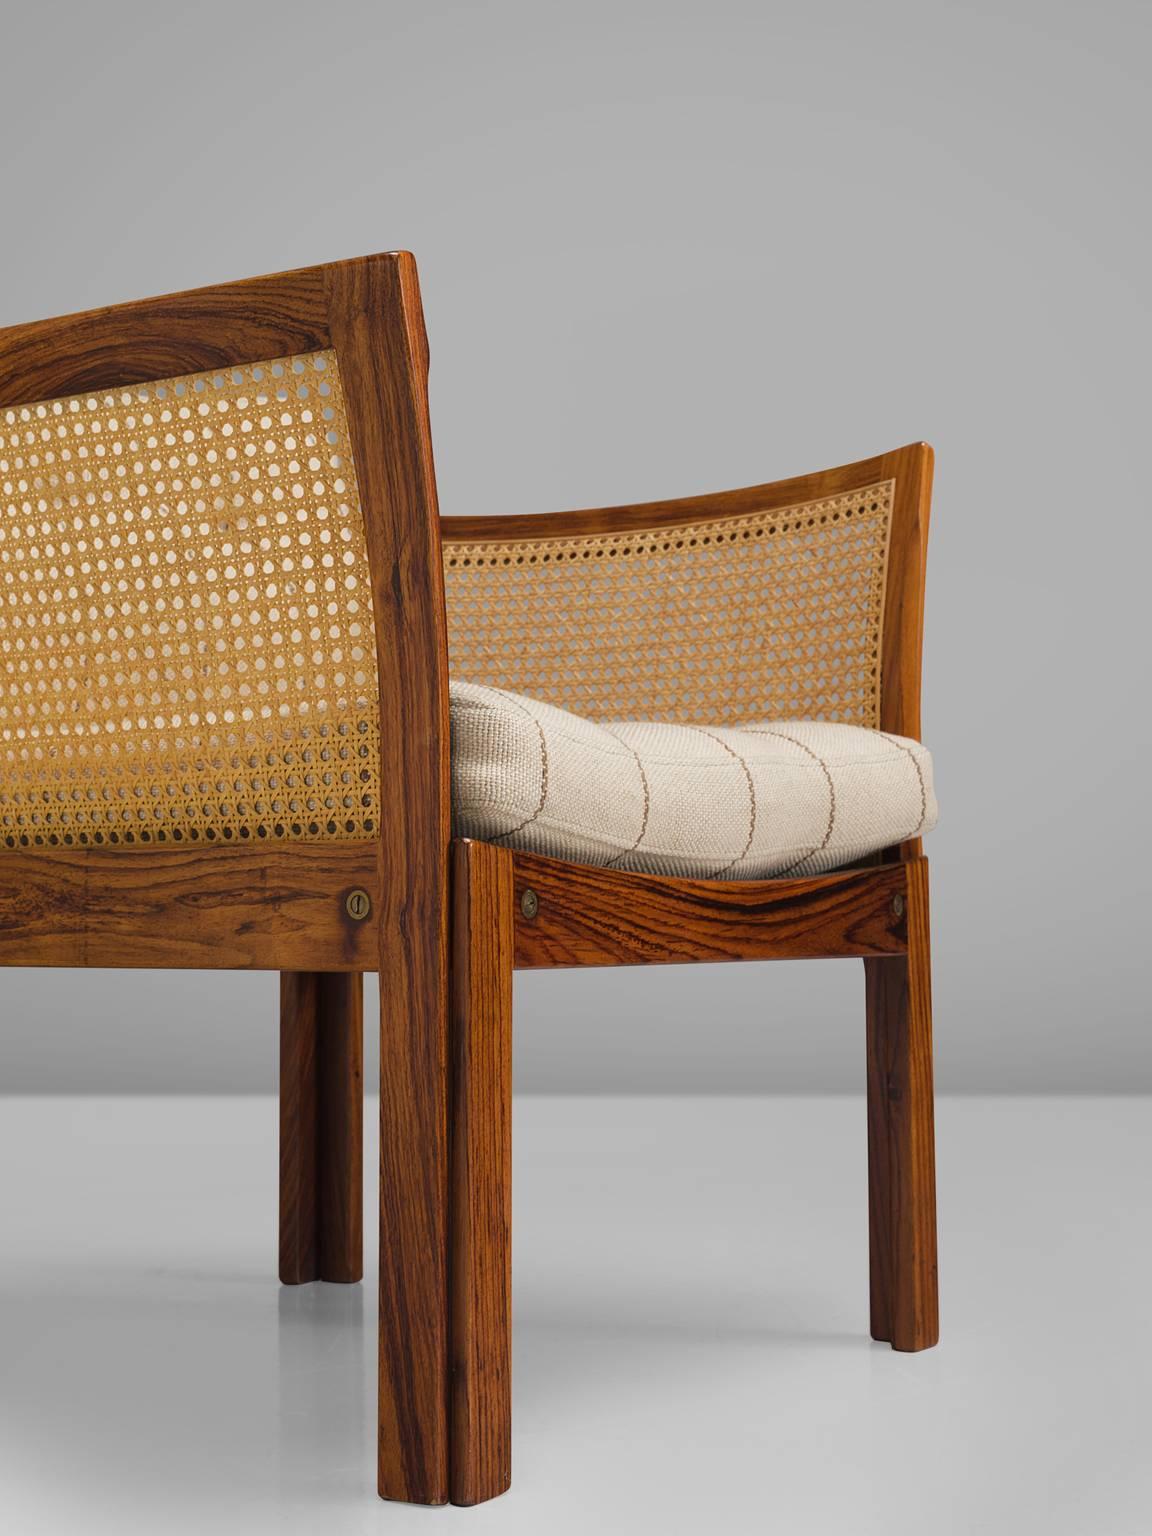 Illum Wikkelsø Pair of Chairs in Rosewood and Cane 1